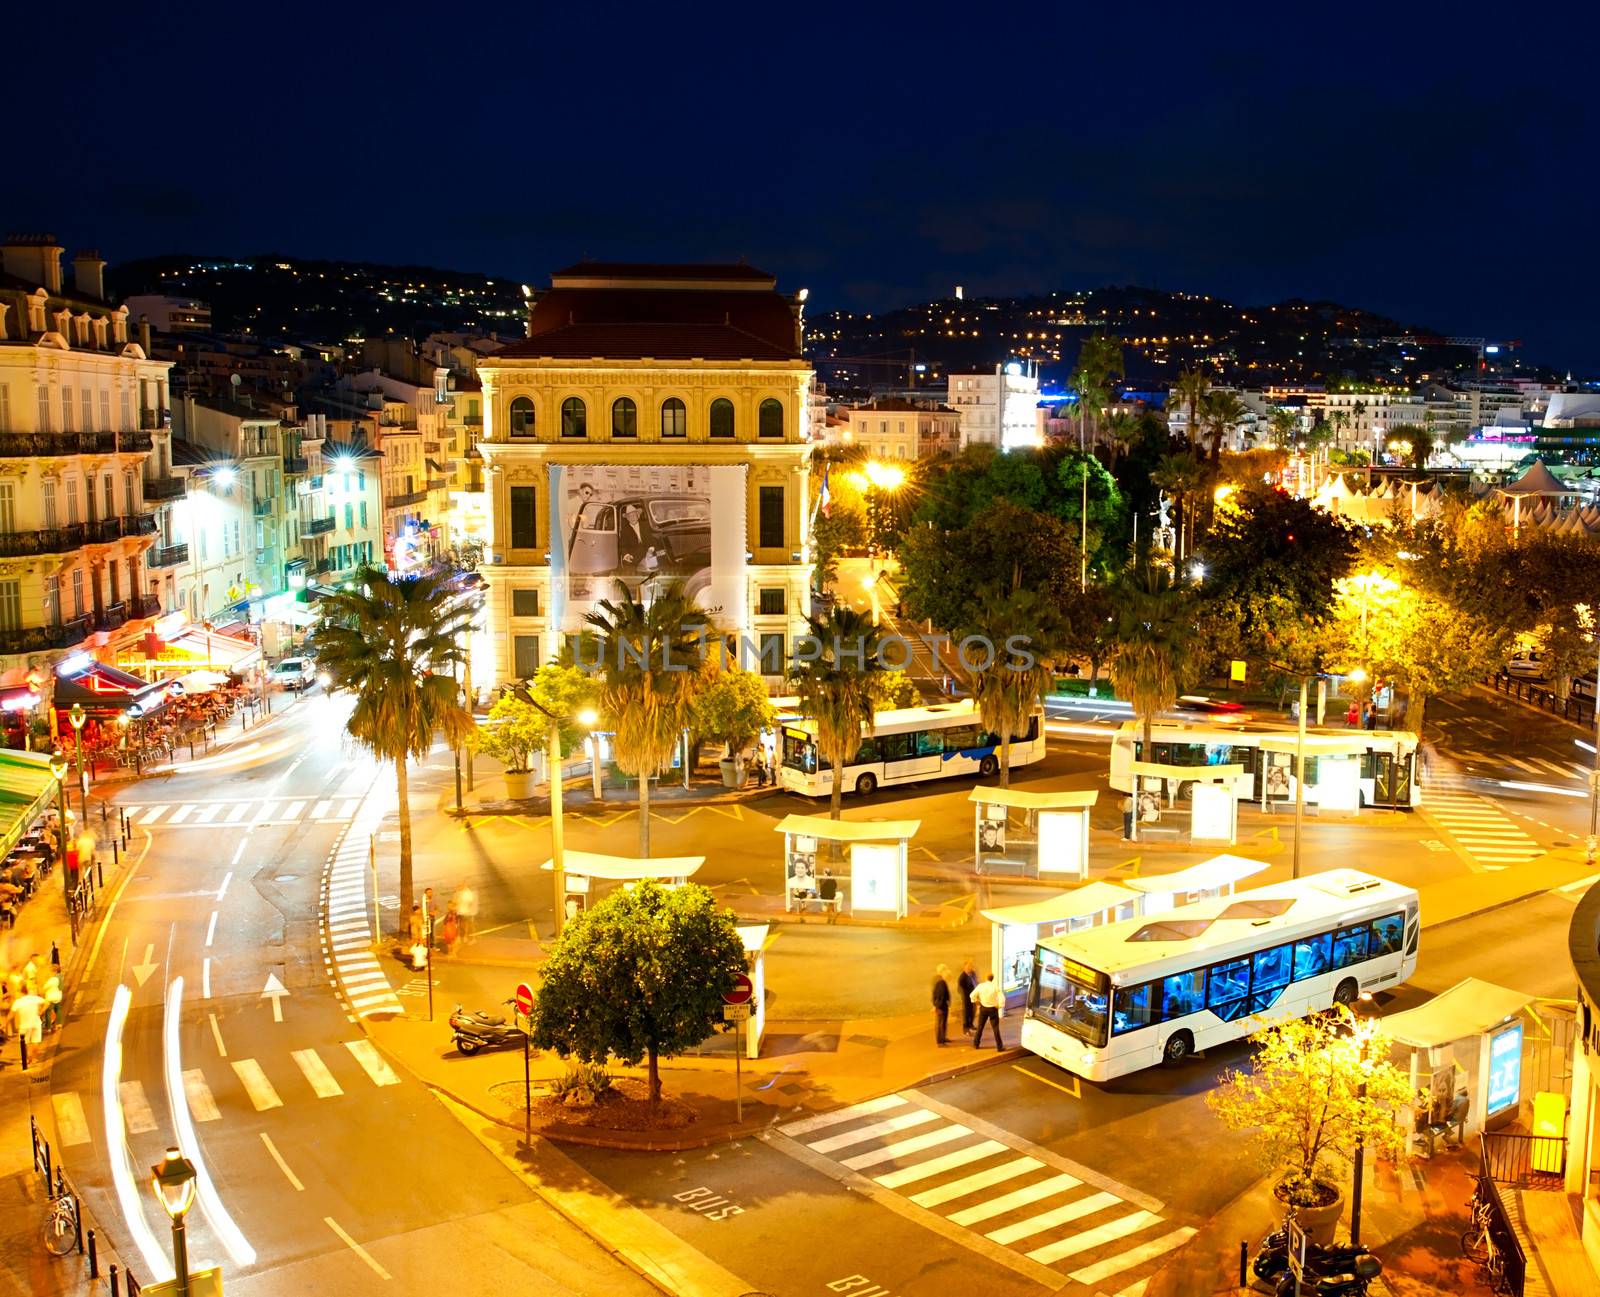 Cannes, France - September 15, 2013: Aerial view of city center of Cannes, France. It is a busy tourist destination and host of the annual Cannes Film Festival and Cannes Lions International Advertising Festival